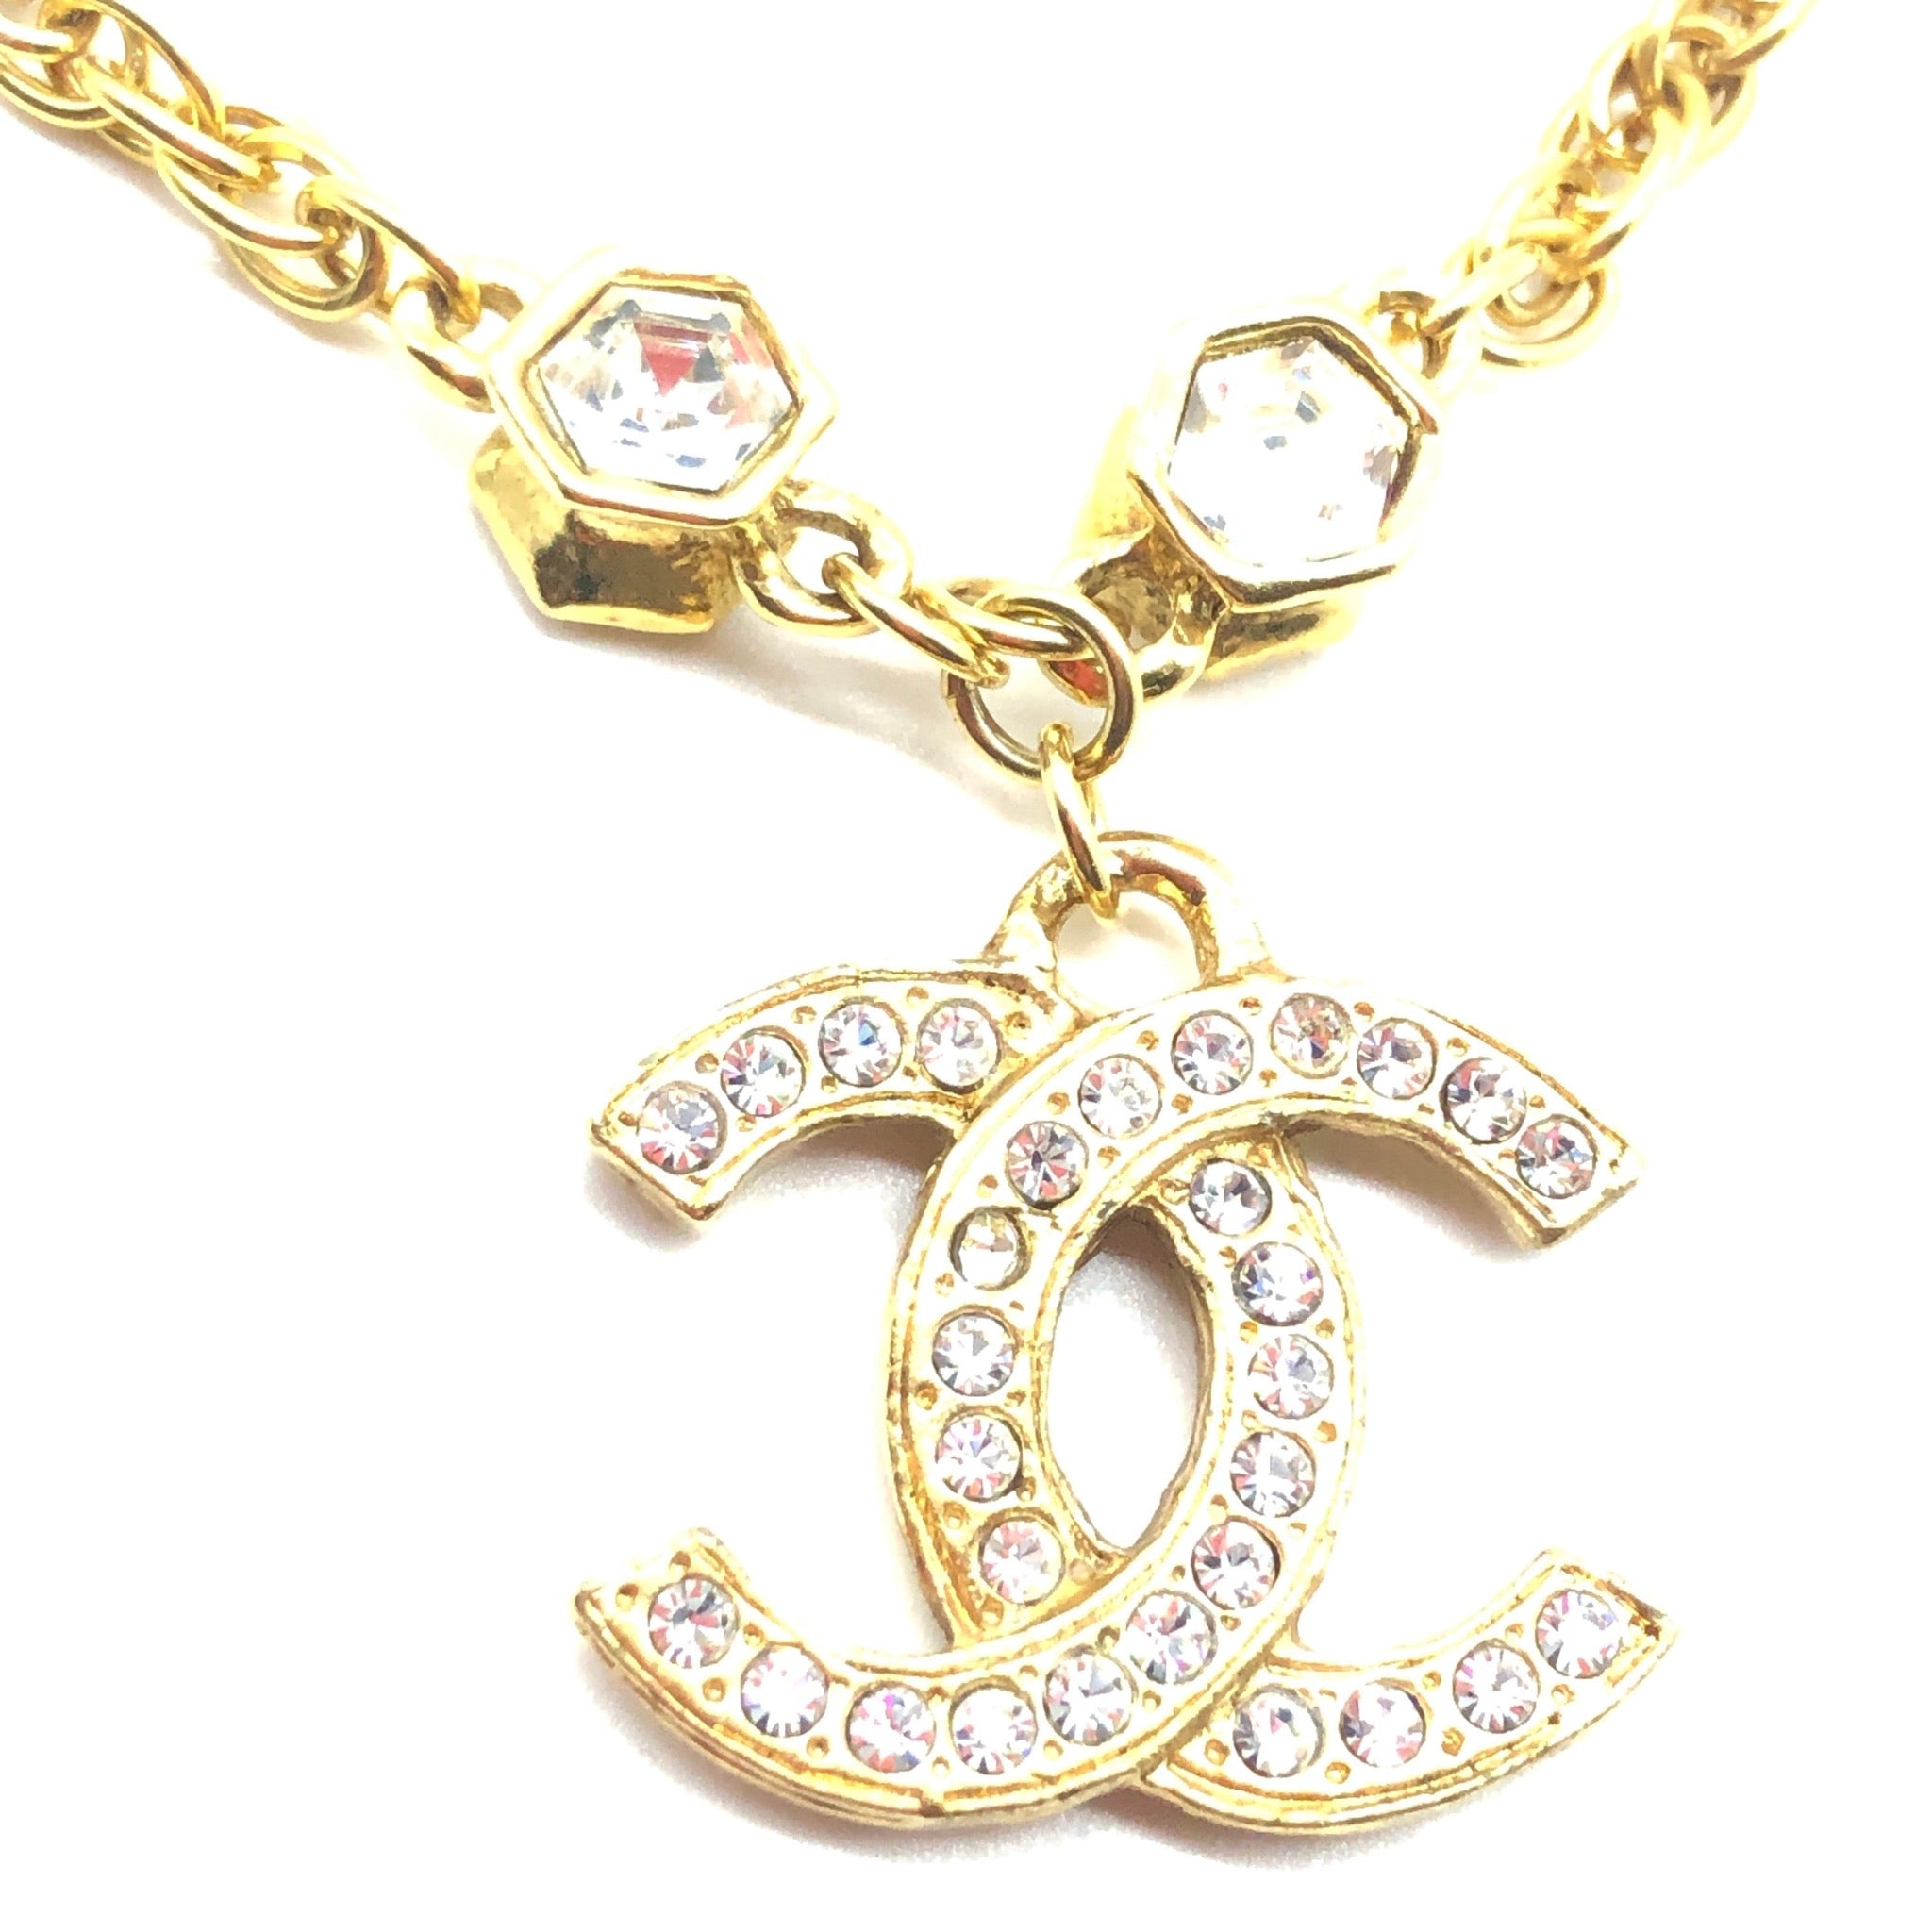 Vintage Chanel Necklace with Crystals and CC Charm – Very Vintage